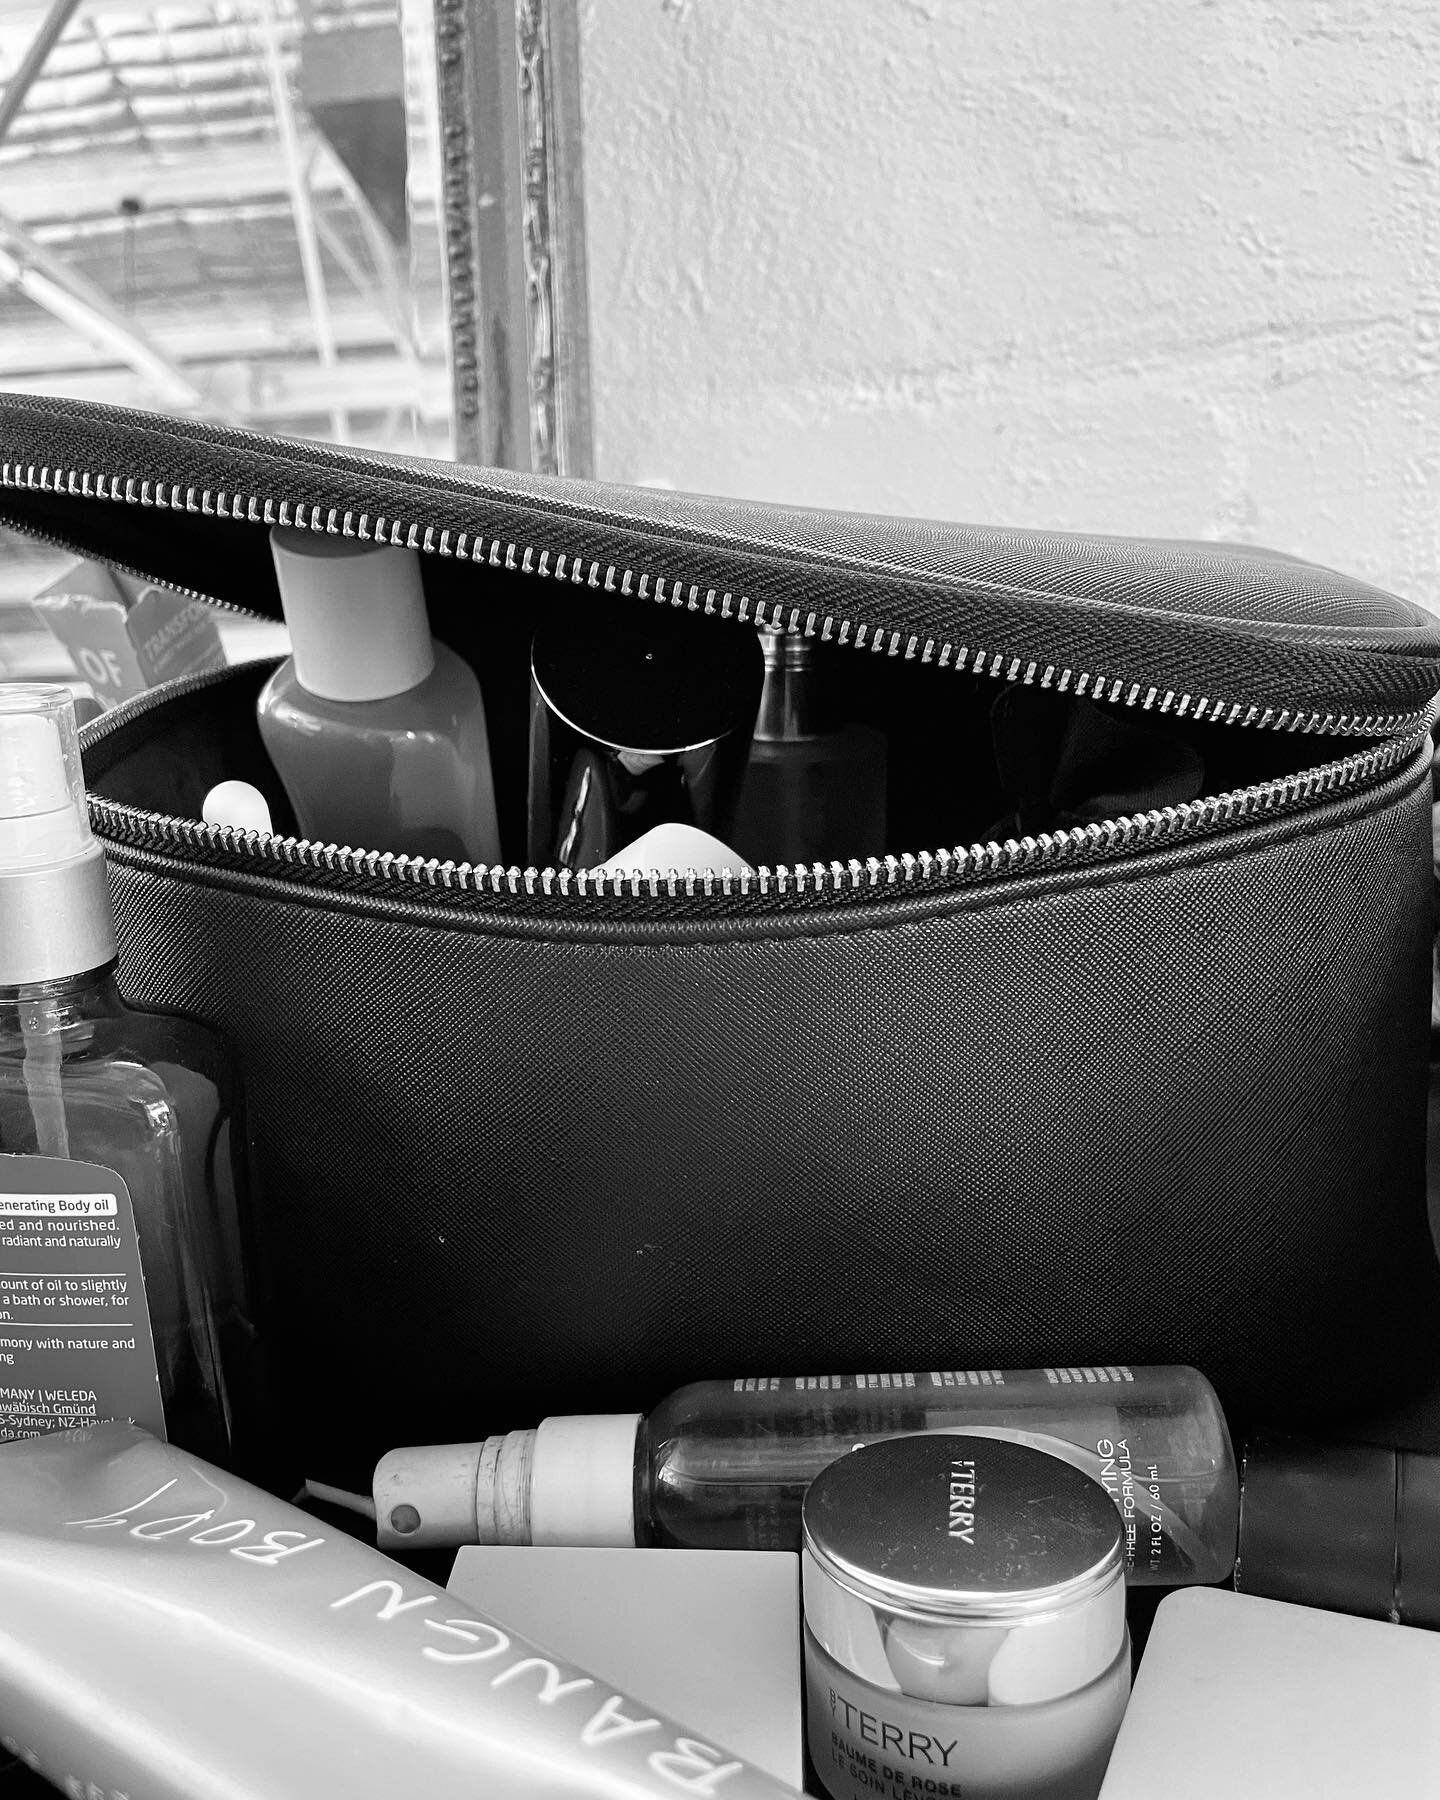 Have you added the Pro-Set to your kit ! 
The Pro-Set bag fits almost any product. Durable construction, padded interior to protect your investments. Add a few to your kit 👌🏻👌🏻👌🏻👌🏻👌🏻

#kit
#kitbag
#beautykit 
#hairkit 
#hairtools 
#productb